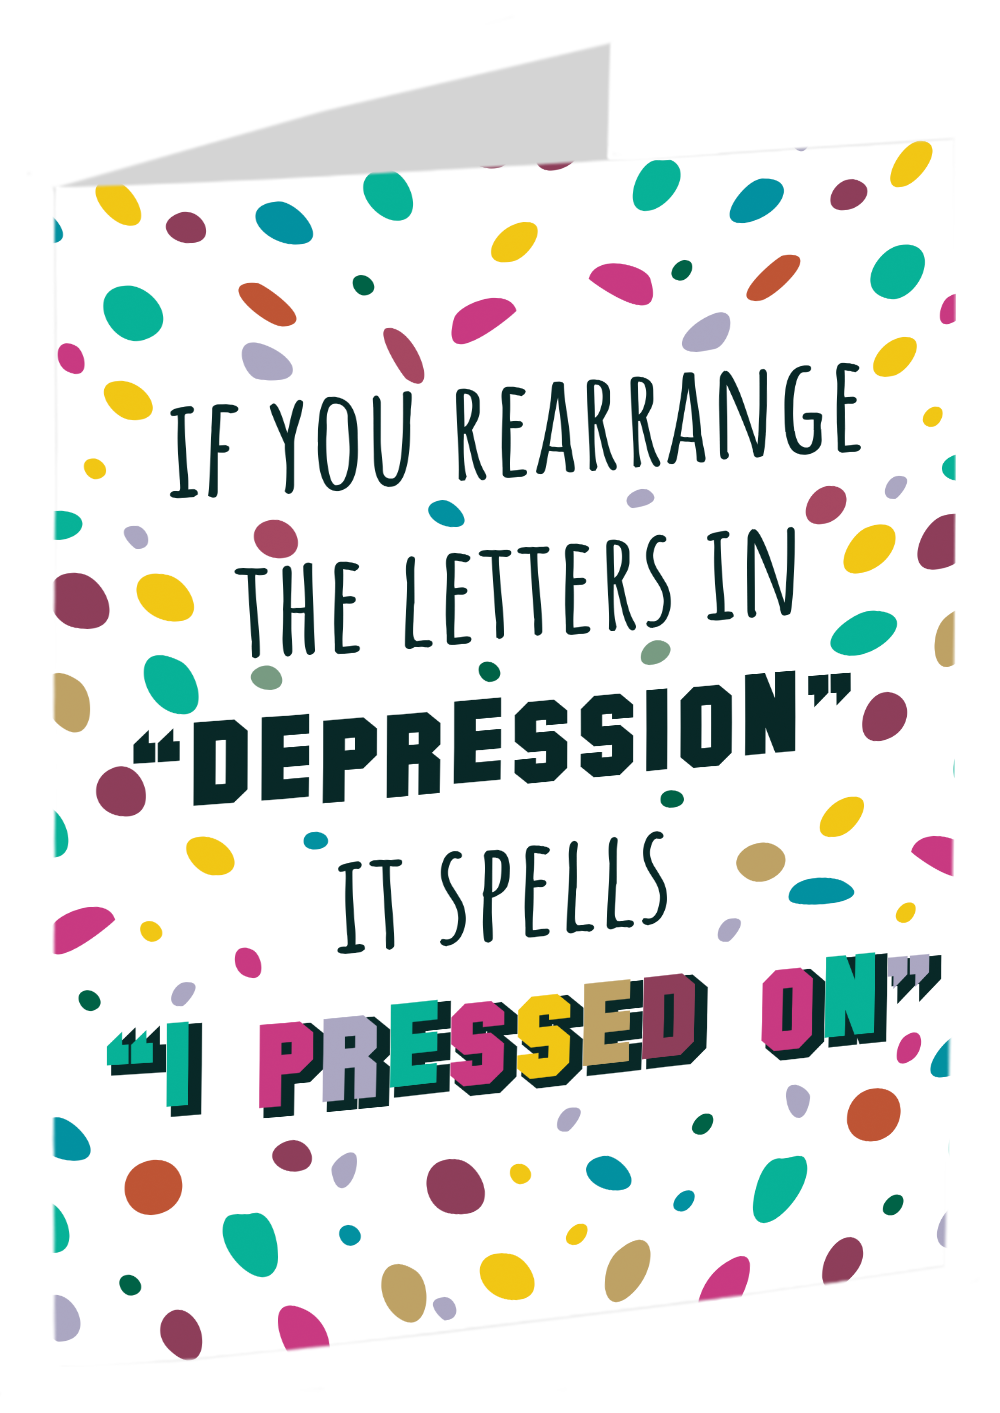 The Letters In Depression Spell "I Pressed On"